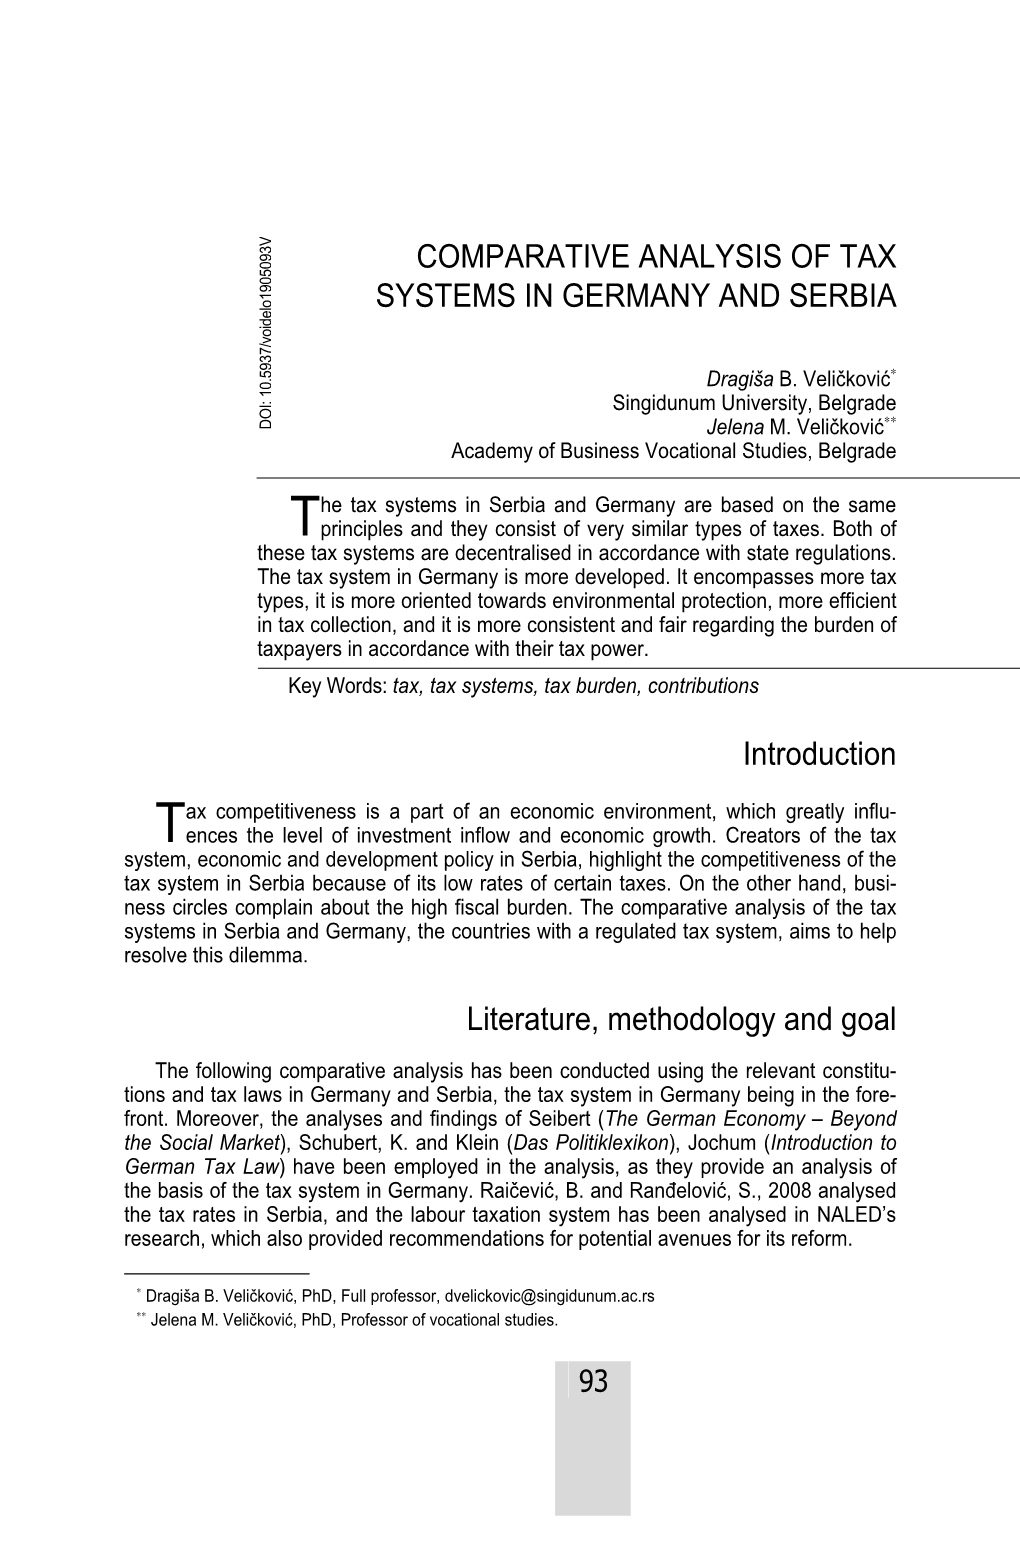 Comparative Analysis of Tax Systems in Germany and Serbia Jurisdiction